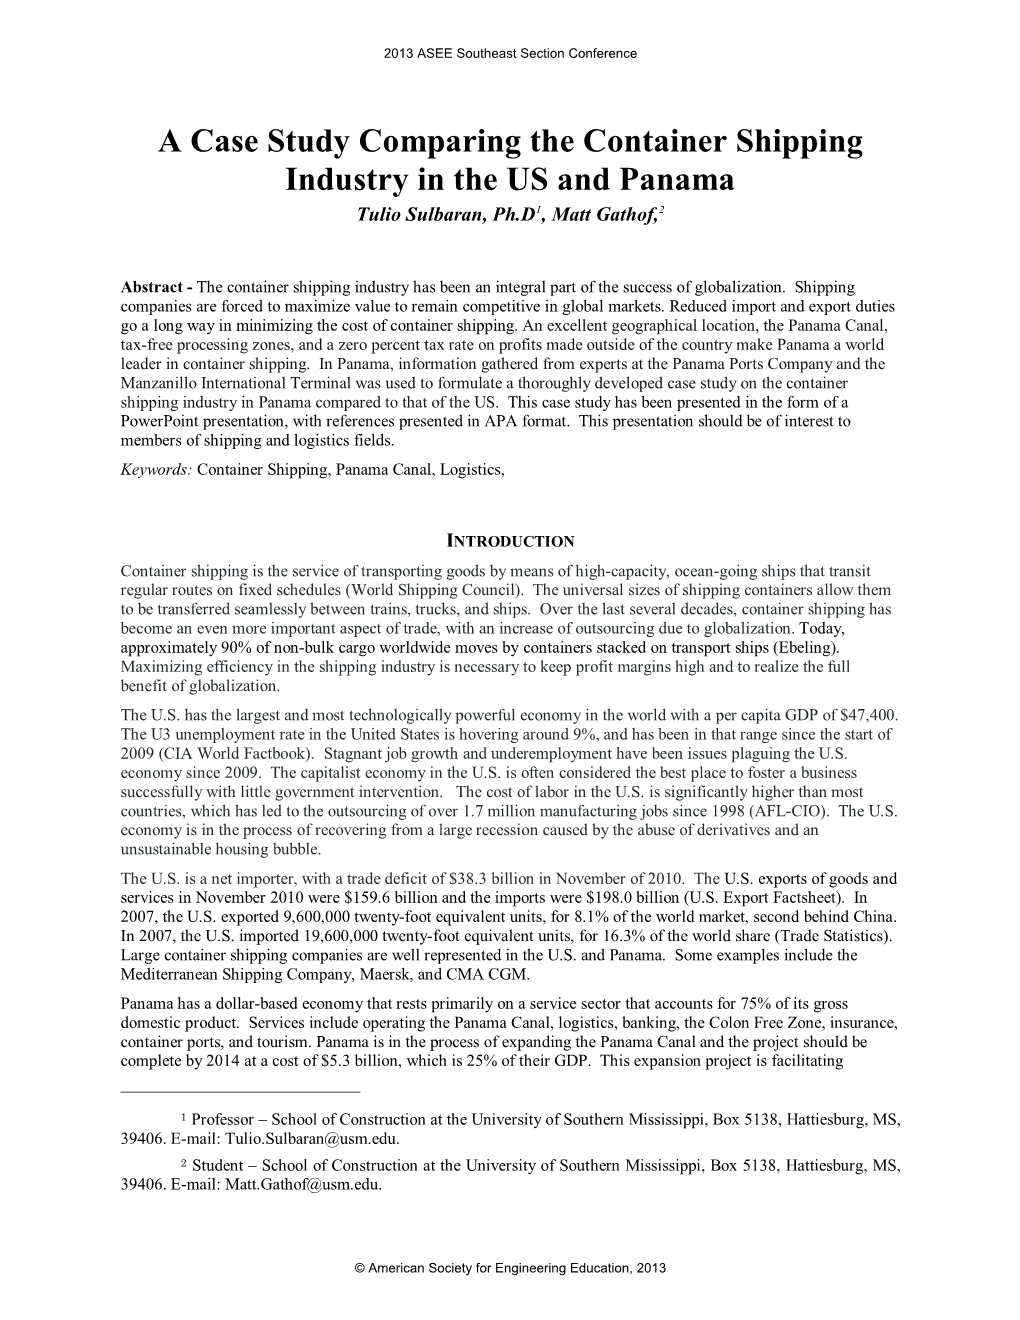 A Case Study Comparing the Container Shipping Industry in the US and Panama Tulio Sulbaran, Ph.D1, Matt Gathof,2